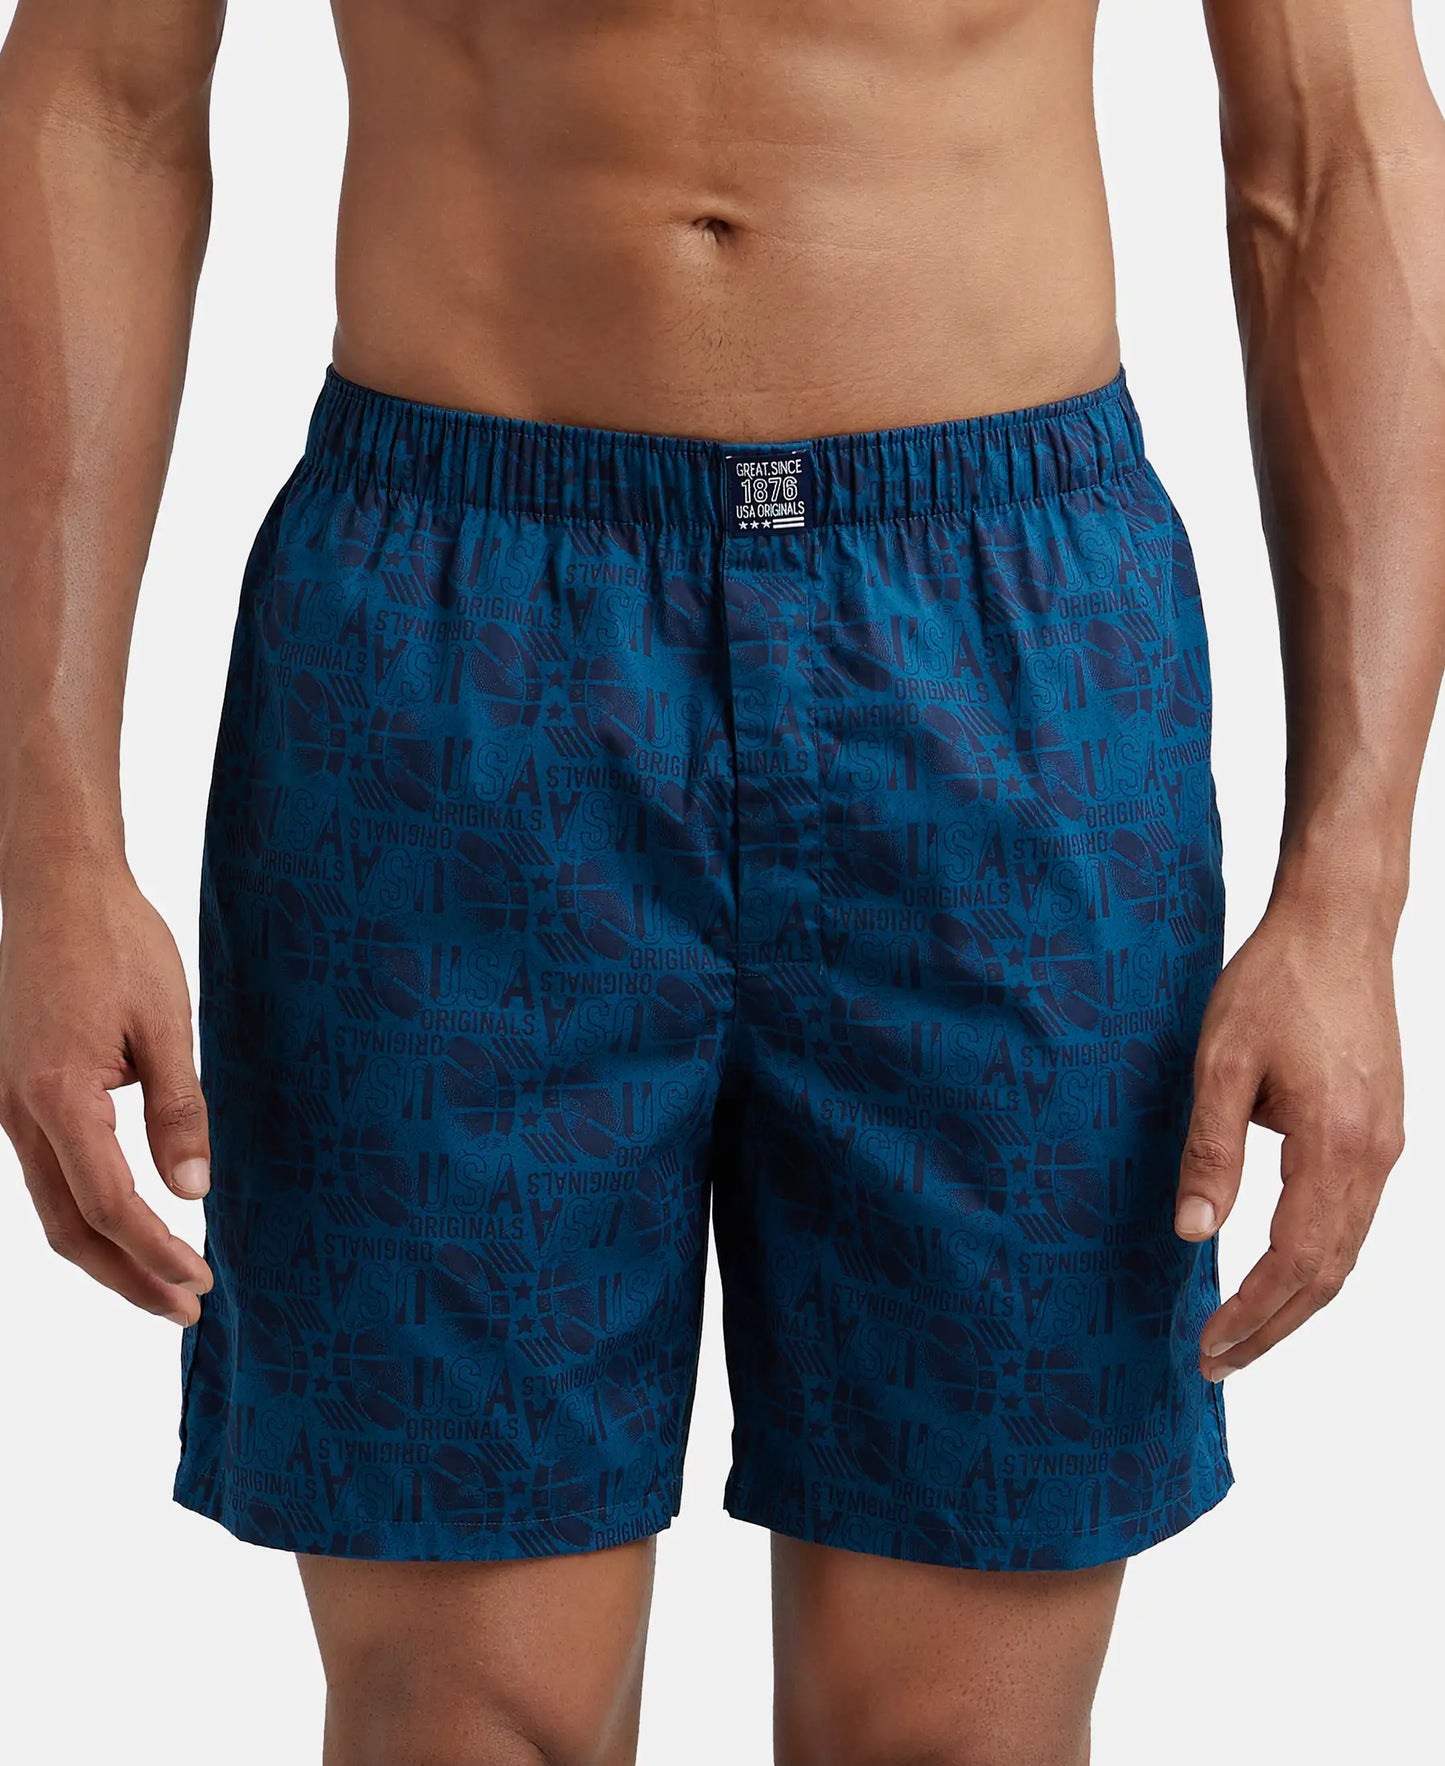 Super Combed Mercerized Cotton Woven Printed Boxer Shorts with Side Pocket - Nickel & Seaport Teal-3